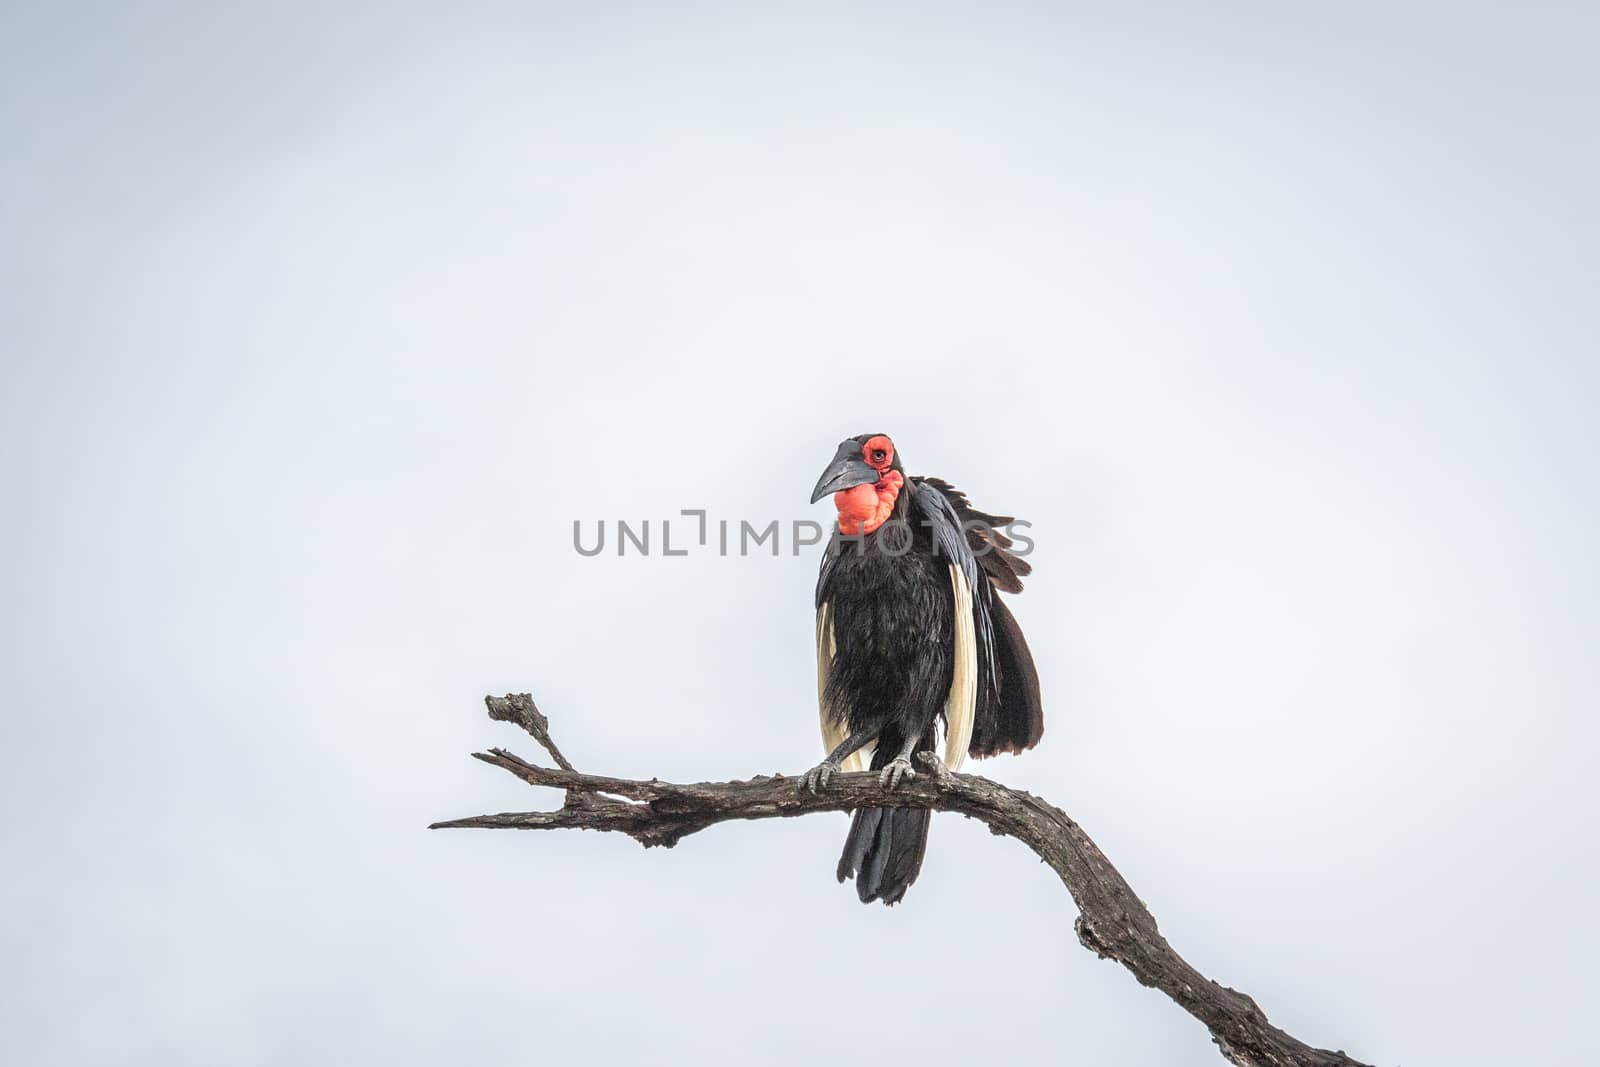 Southern ground hornbill in a tree in the Kruger National Park, South Africa.